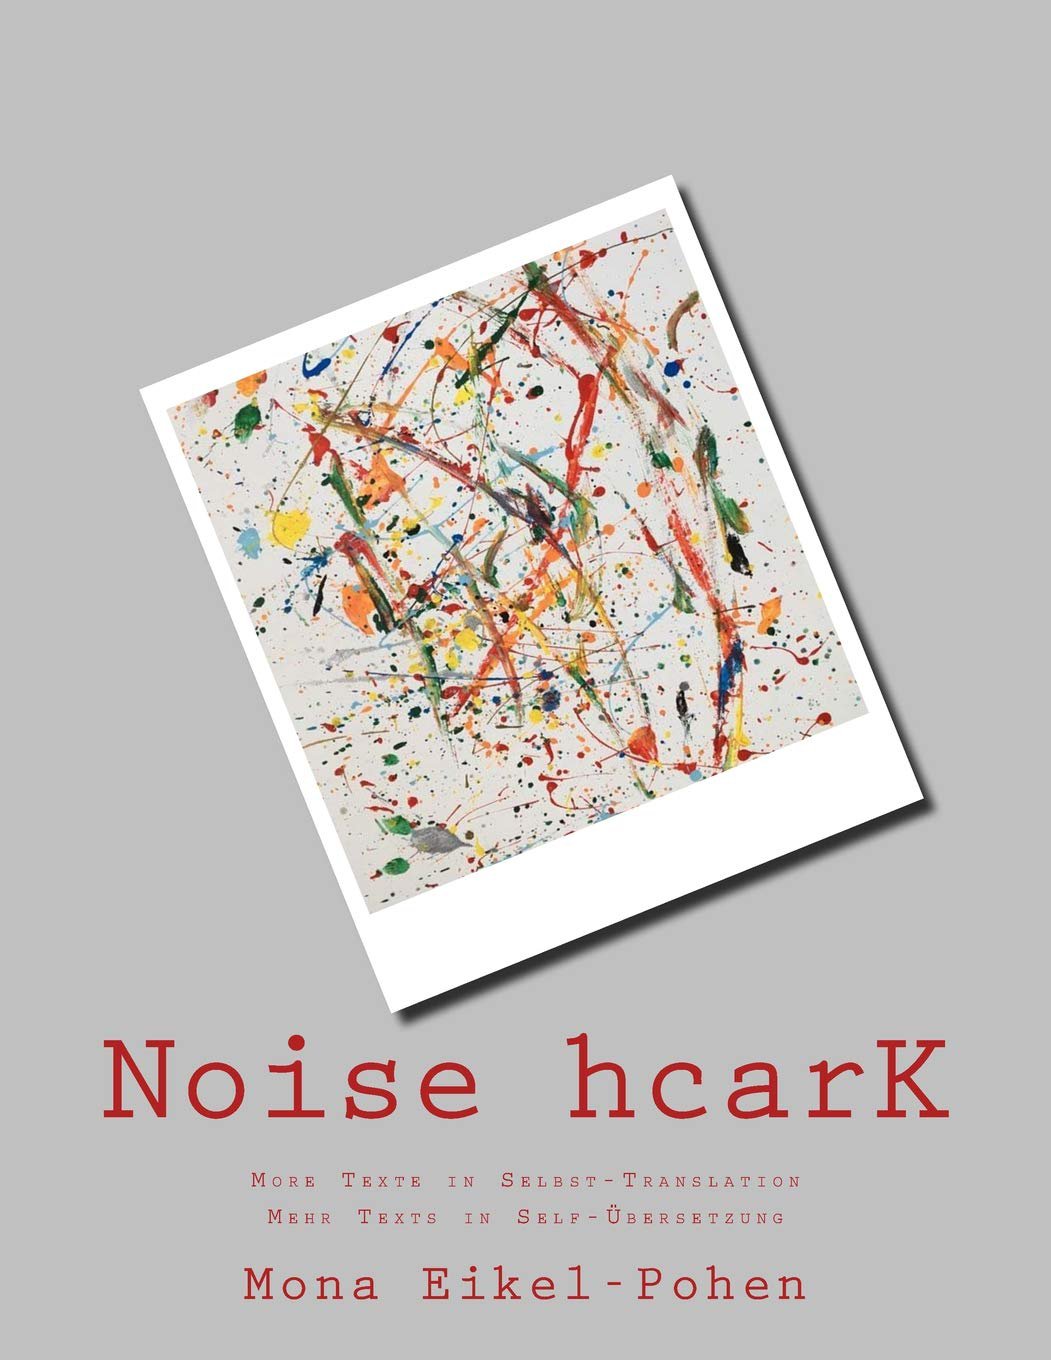 Noise hcarK: More Texte in Selbst-Translation. Mehr Texts in Self-Übersetzung